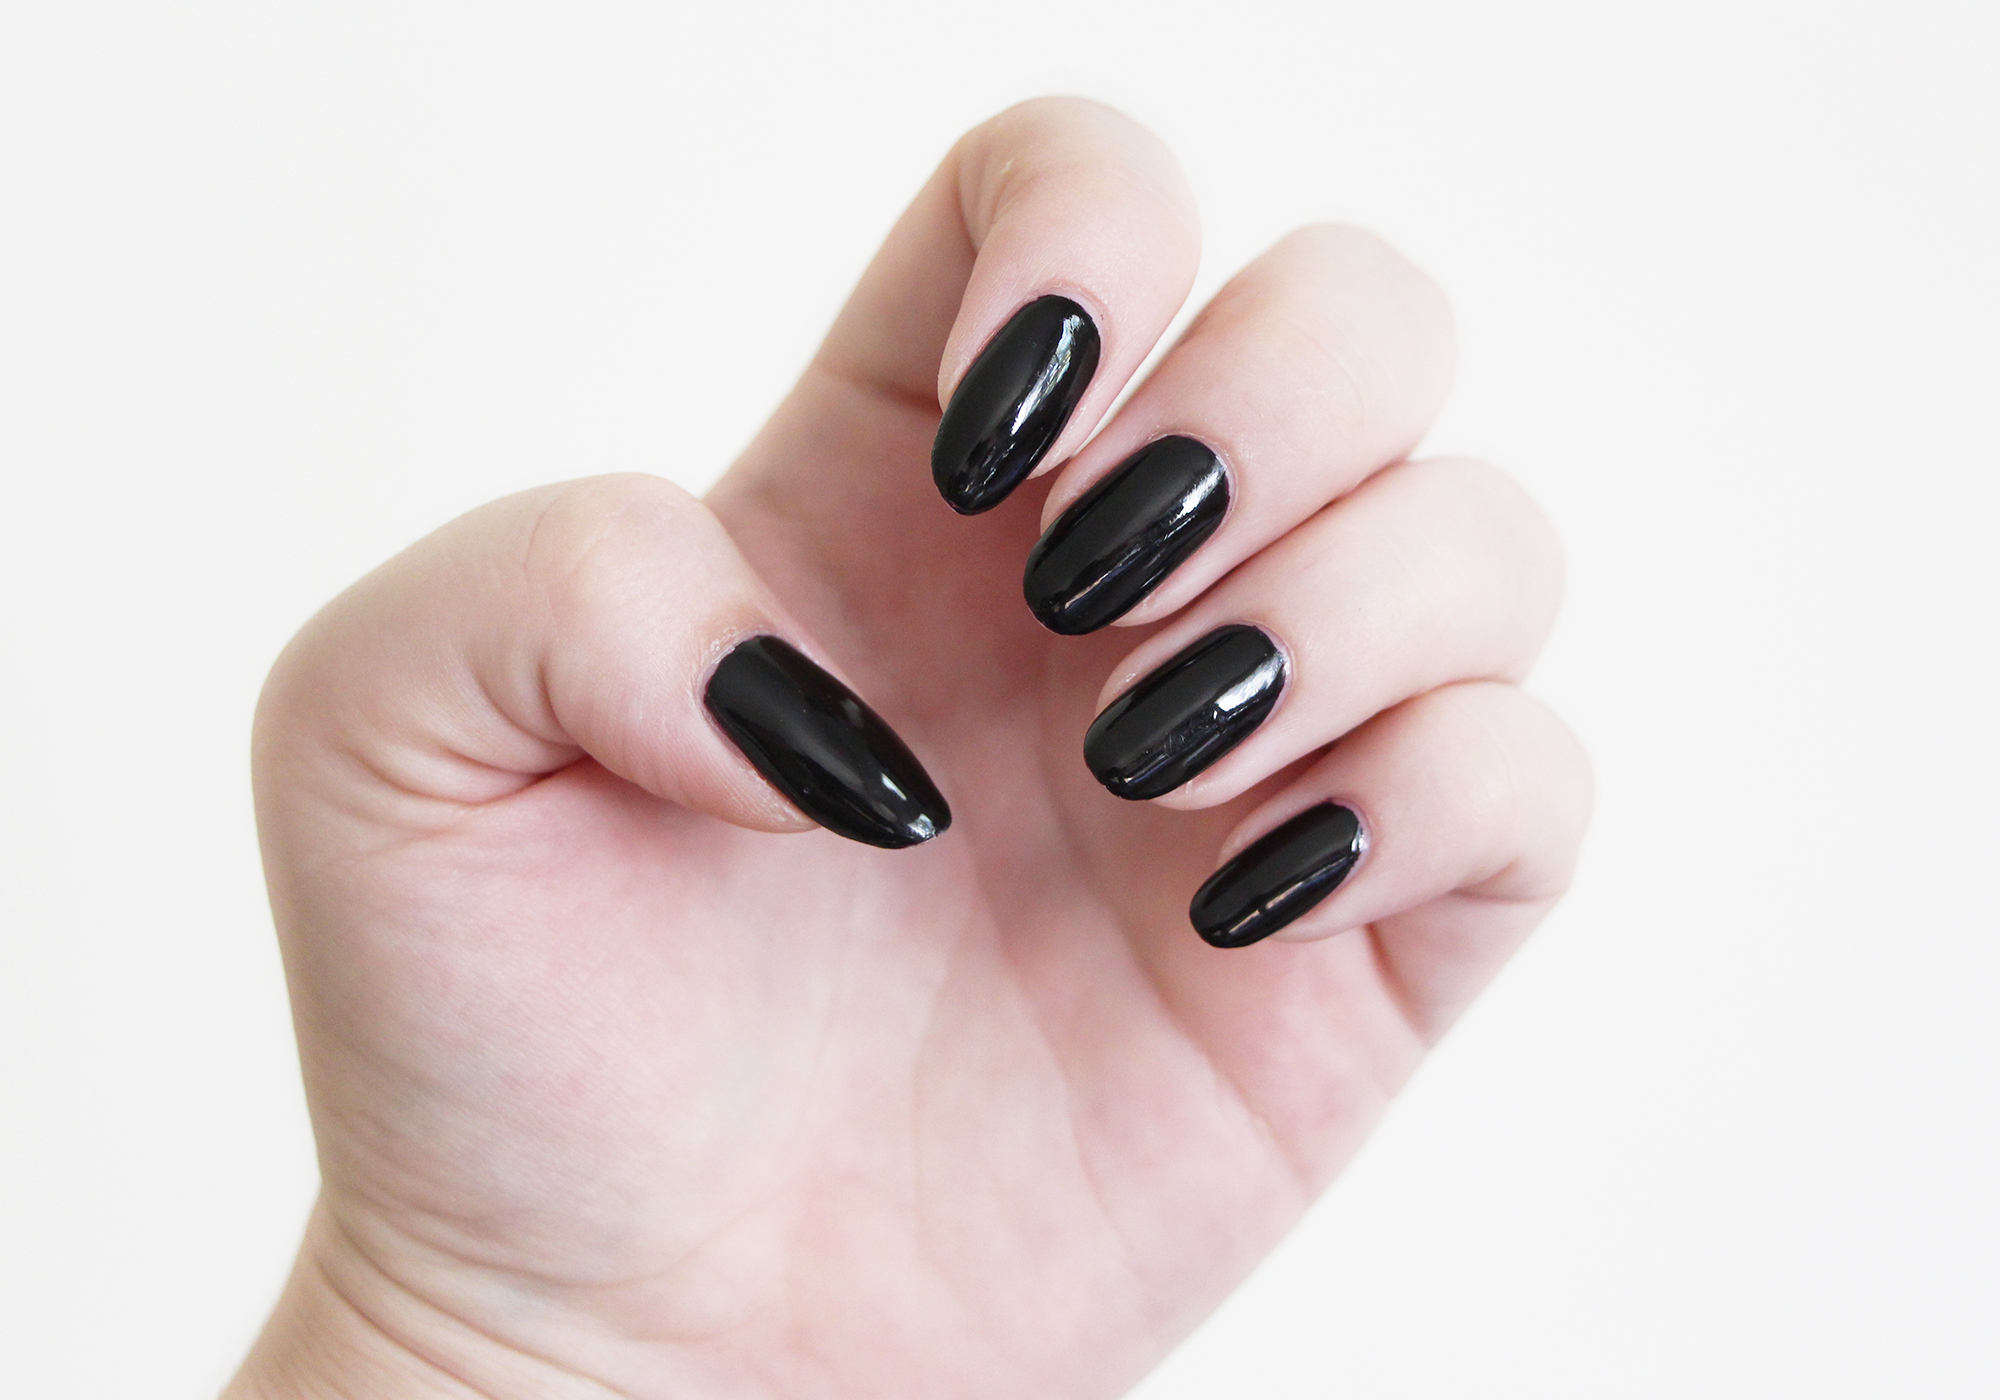 4. OPI Infinite Shine Nail Polish in "Lincoln Park After Dark" - wide 5